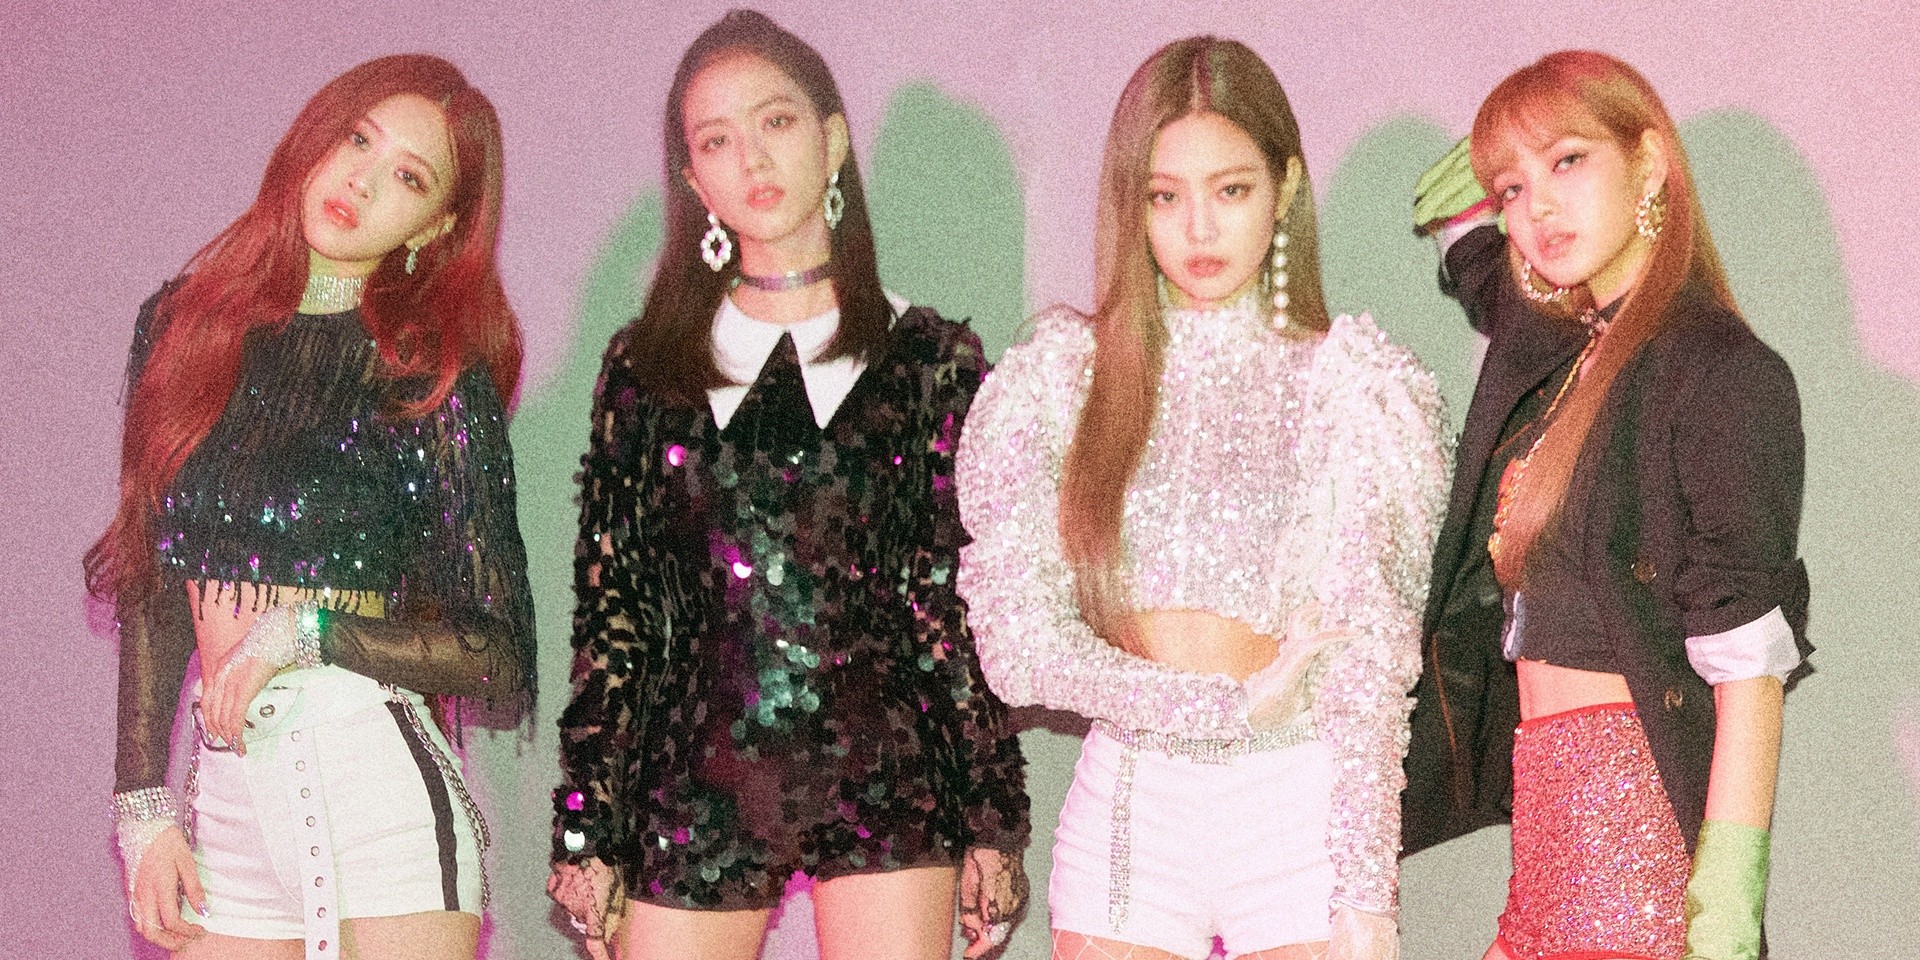 BLACKPINK becomes the first K-pop group to hit a billion views on YouTube 